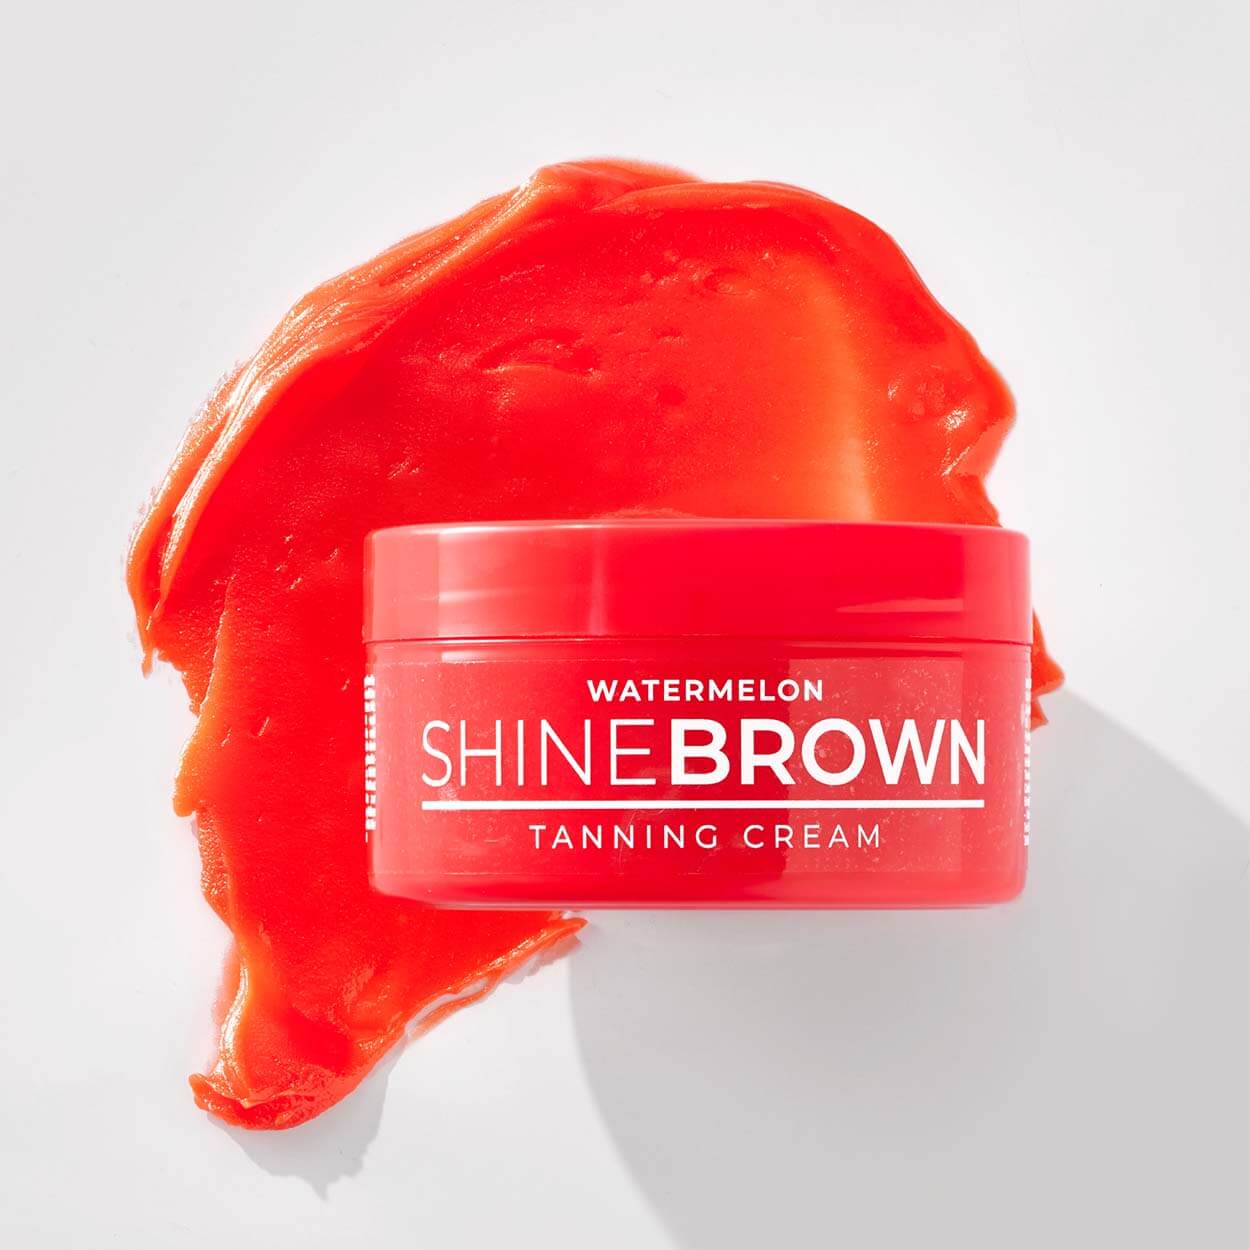 Shine Brown Watermelon tanning cream with smeared tanning cream in the background.